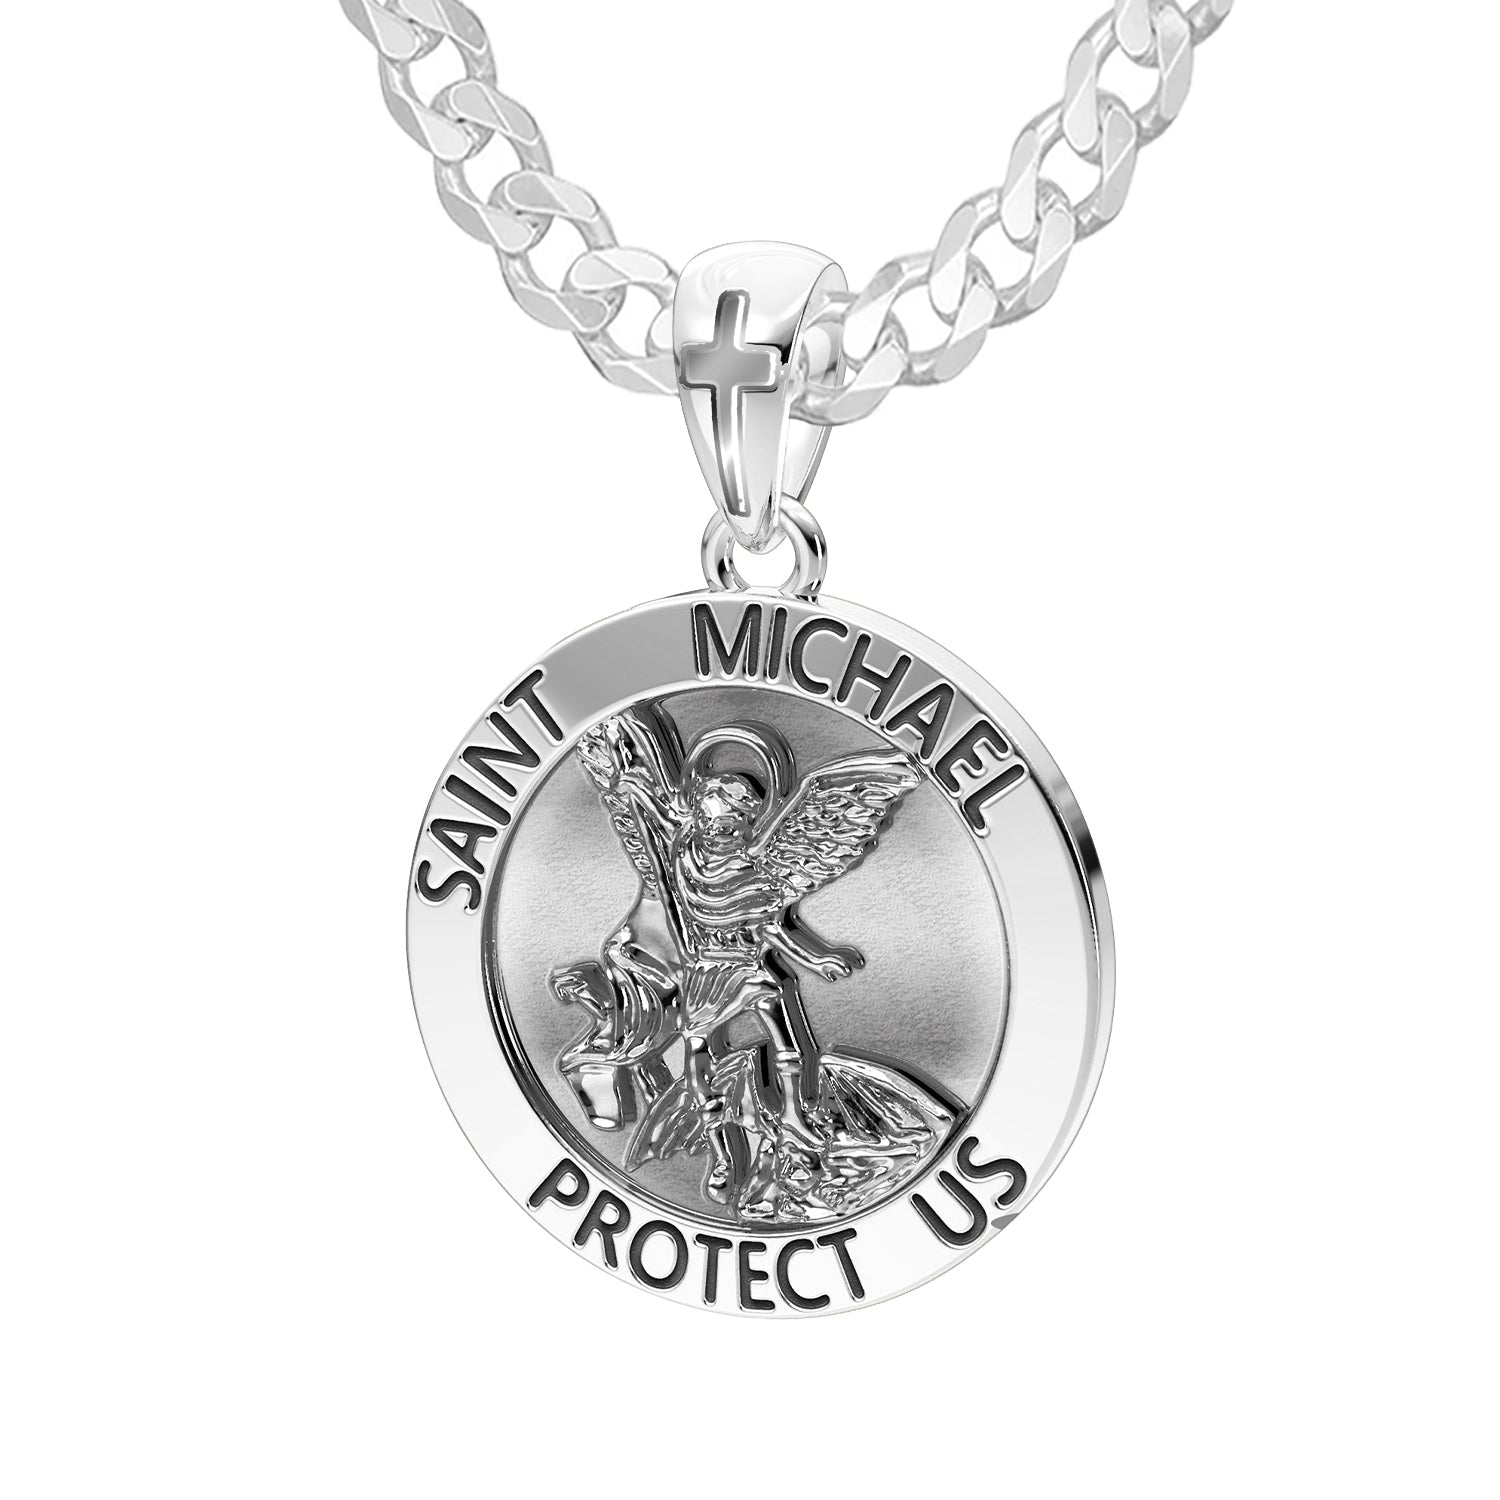 Men's XL 925 Sterling Silver 1.25in St Saint Michael Medal Antique Finish Round Pendant Necklace, 32mm - US Jewels